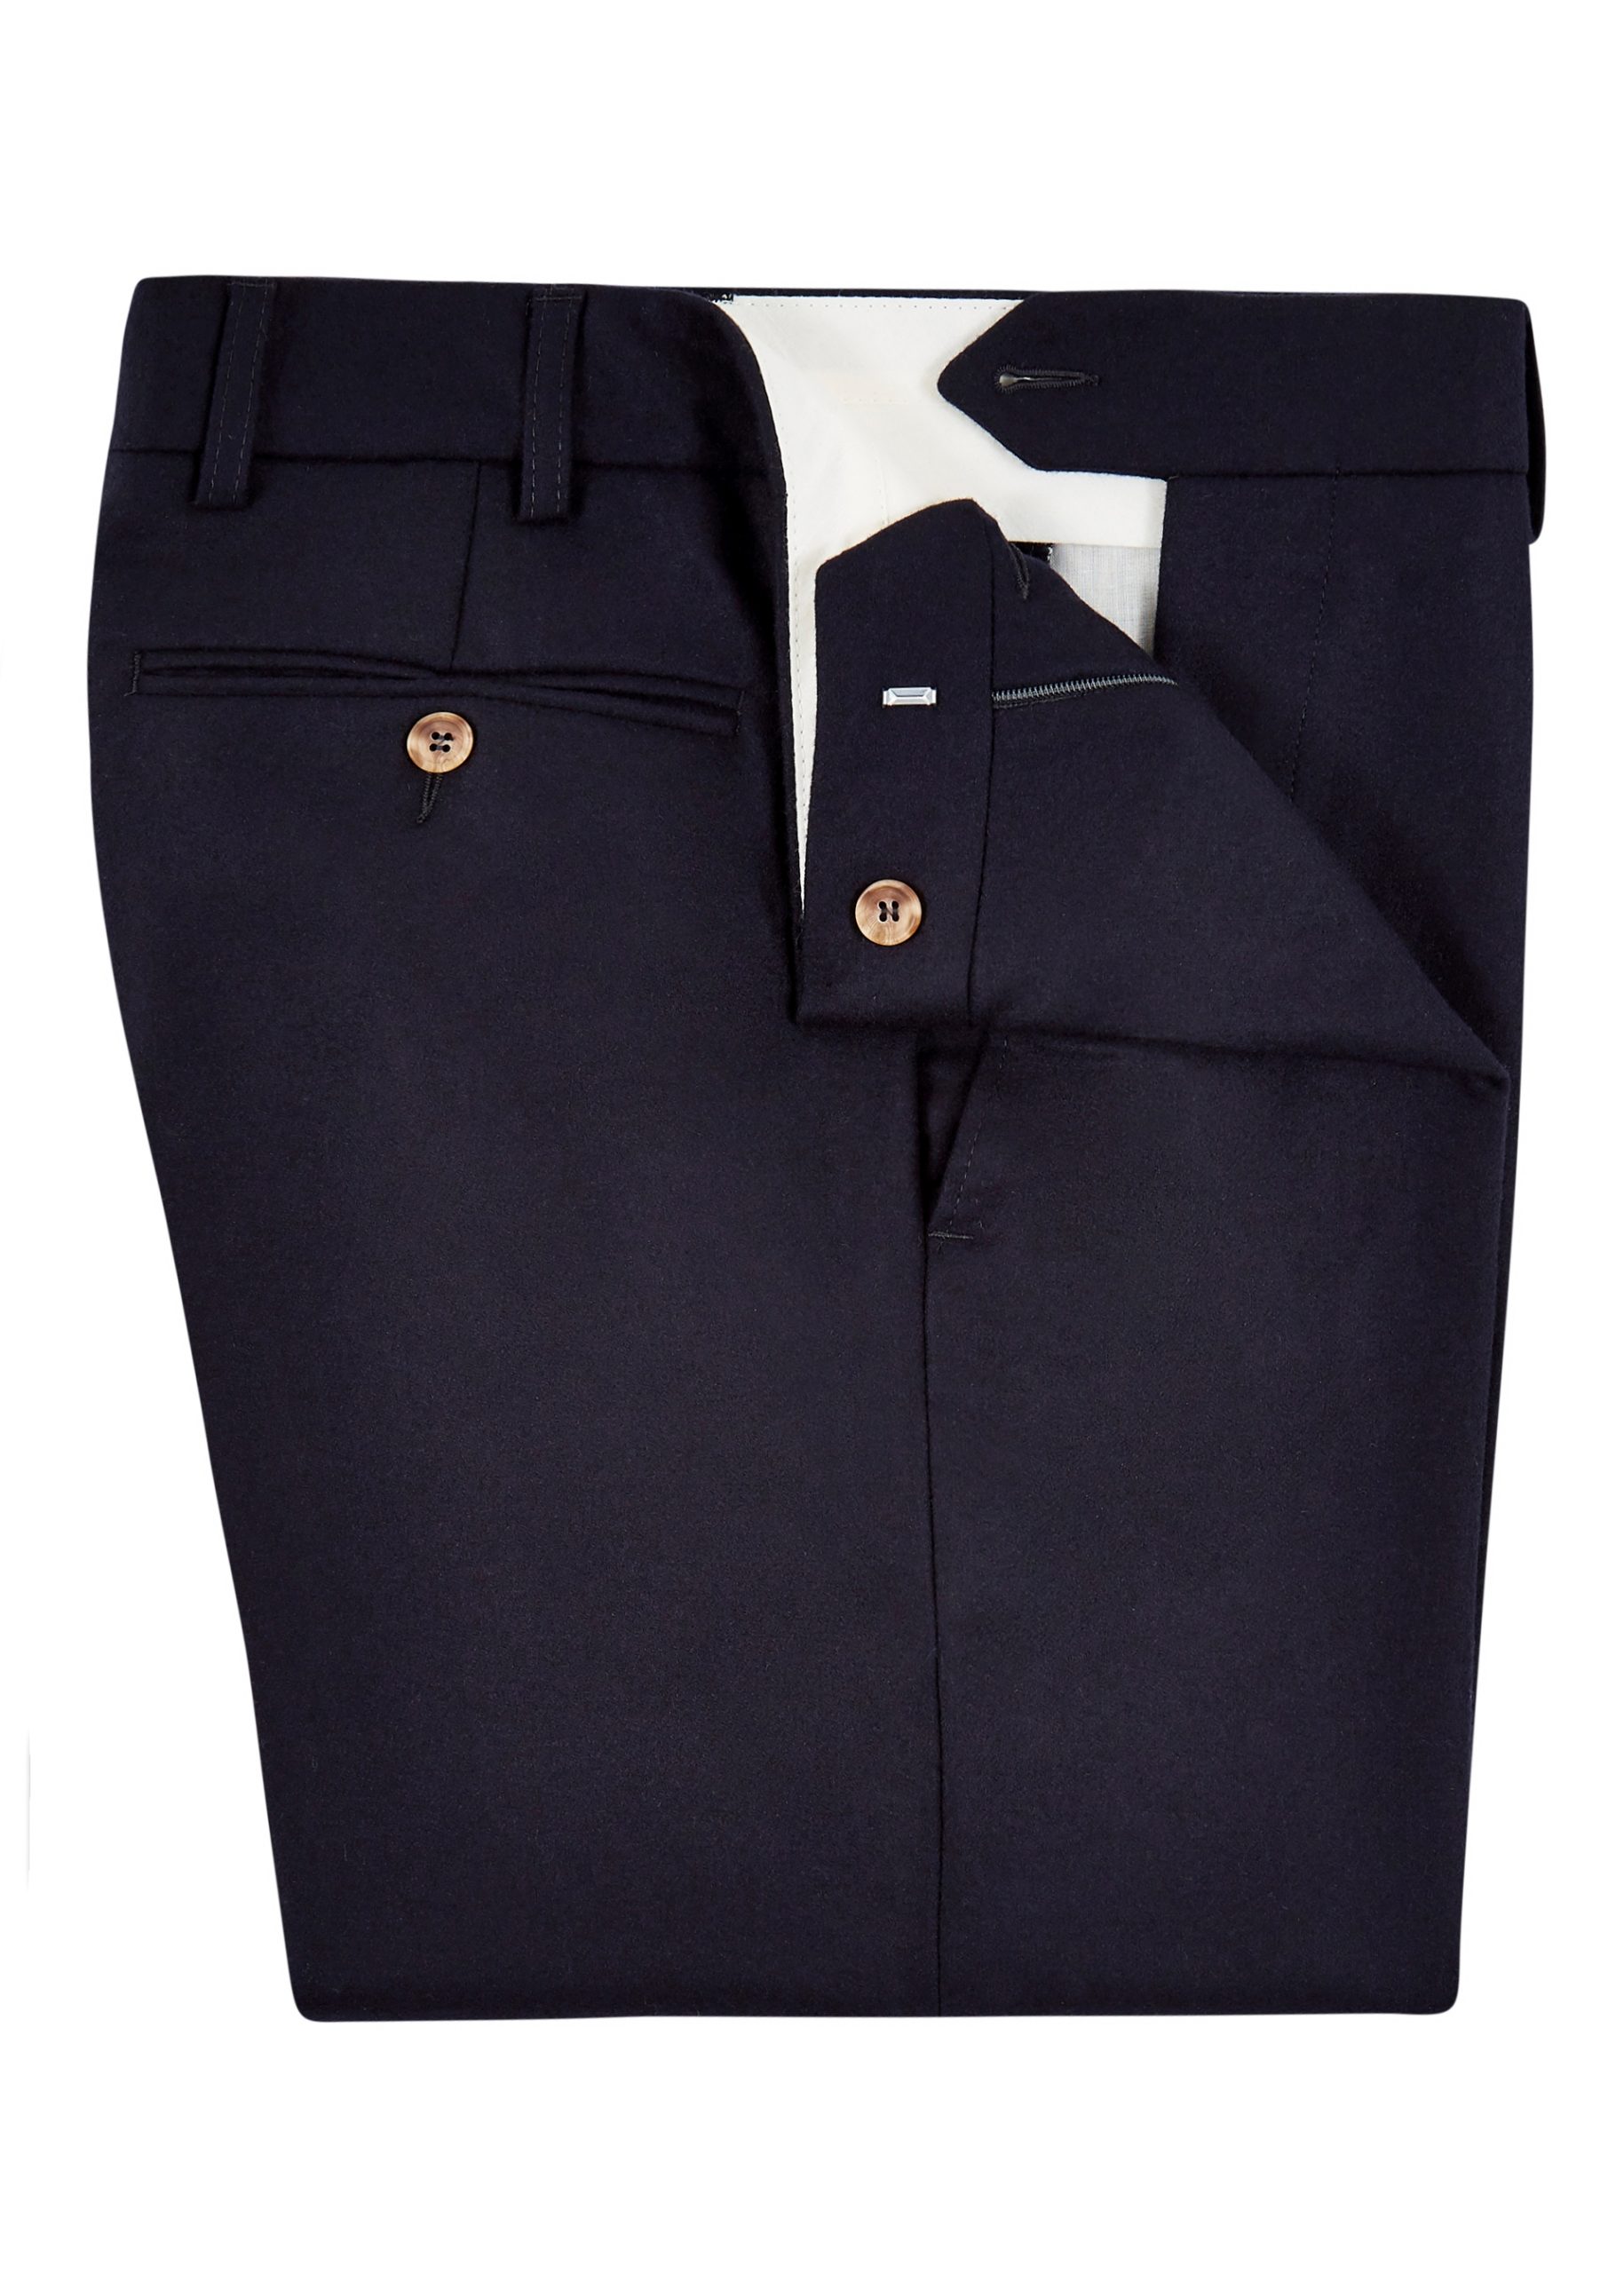 Flannel trousers in navy blue with two rear pockets